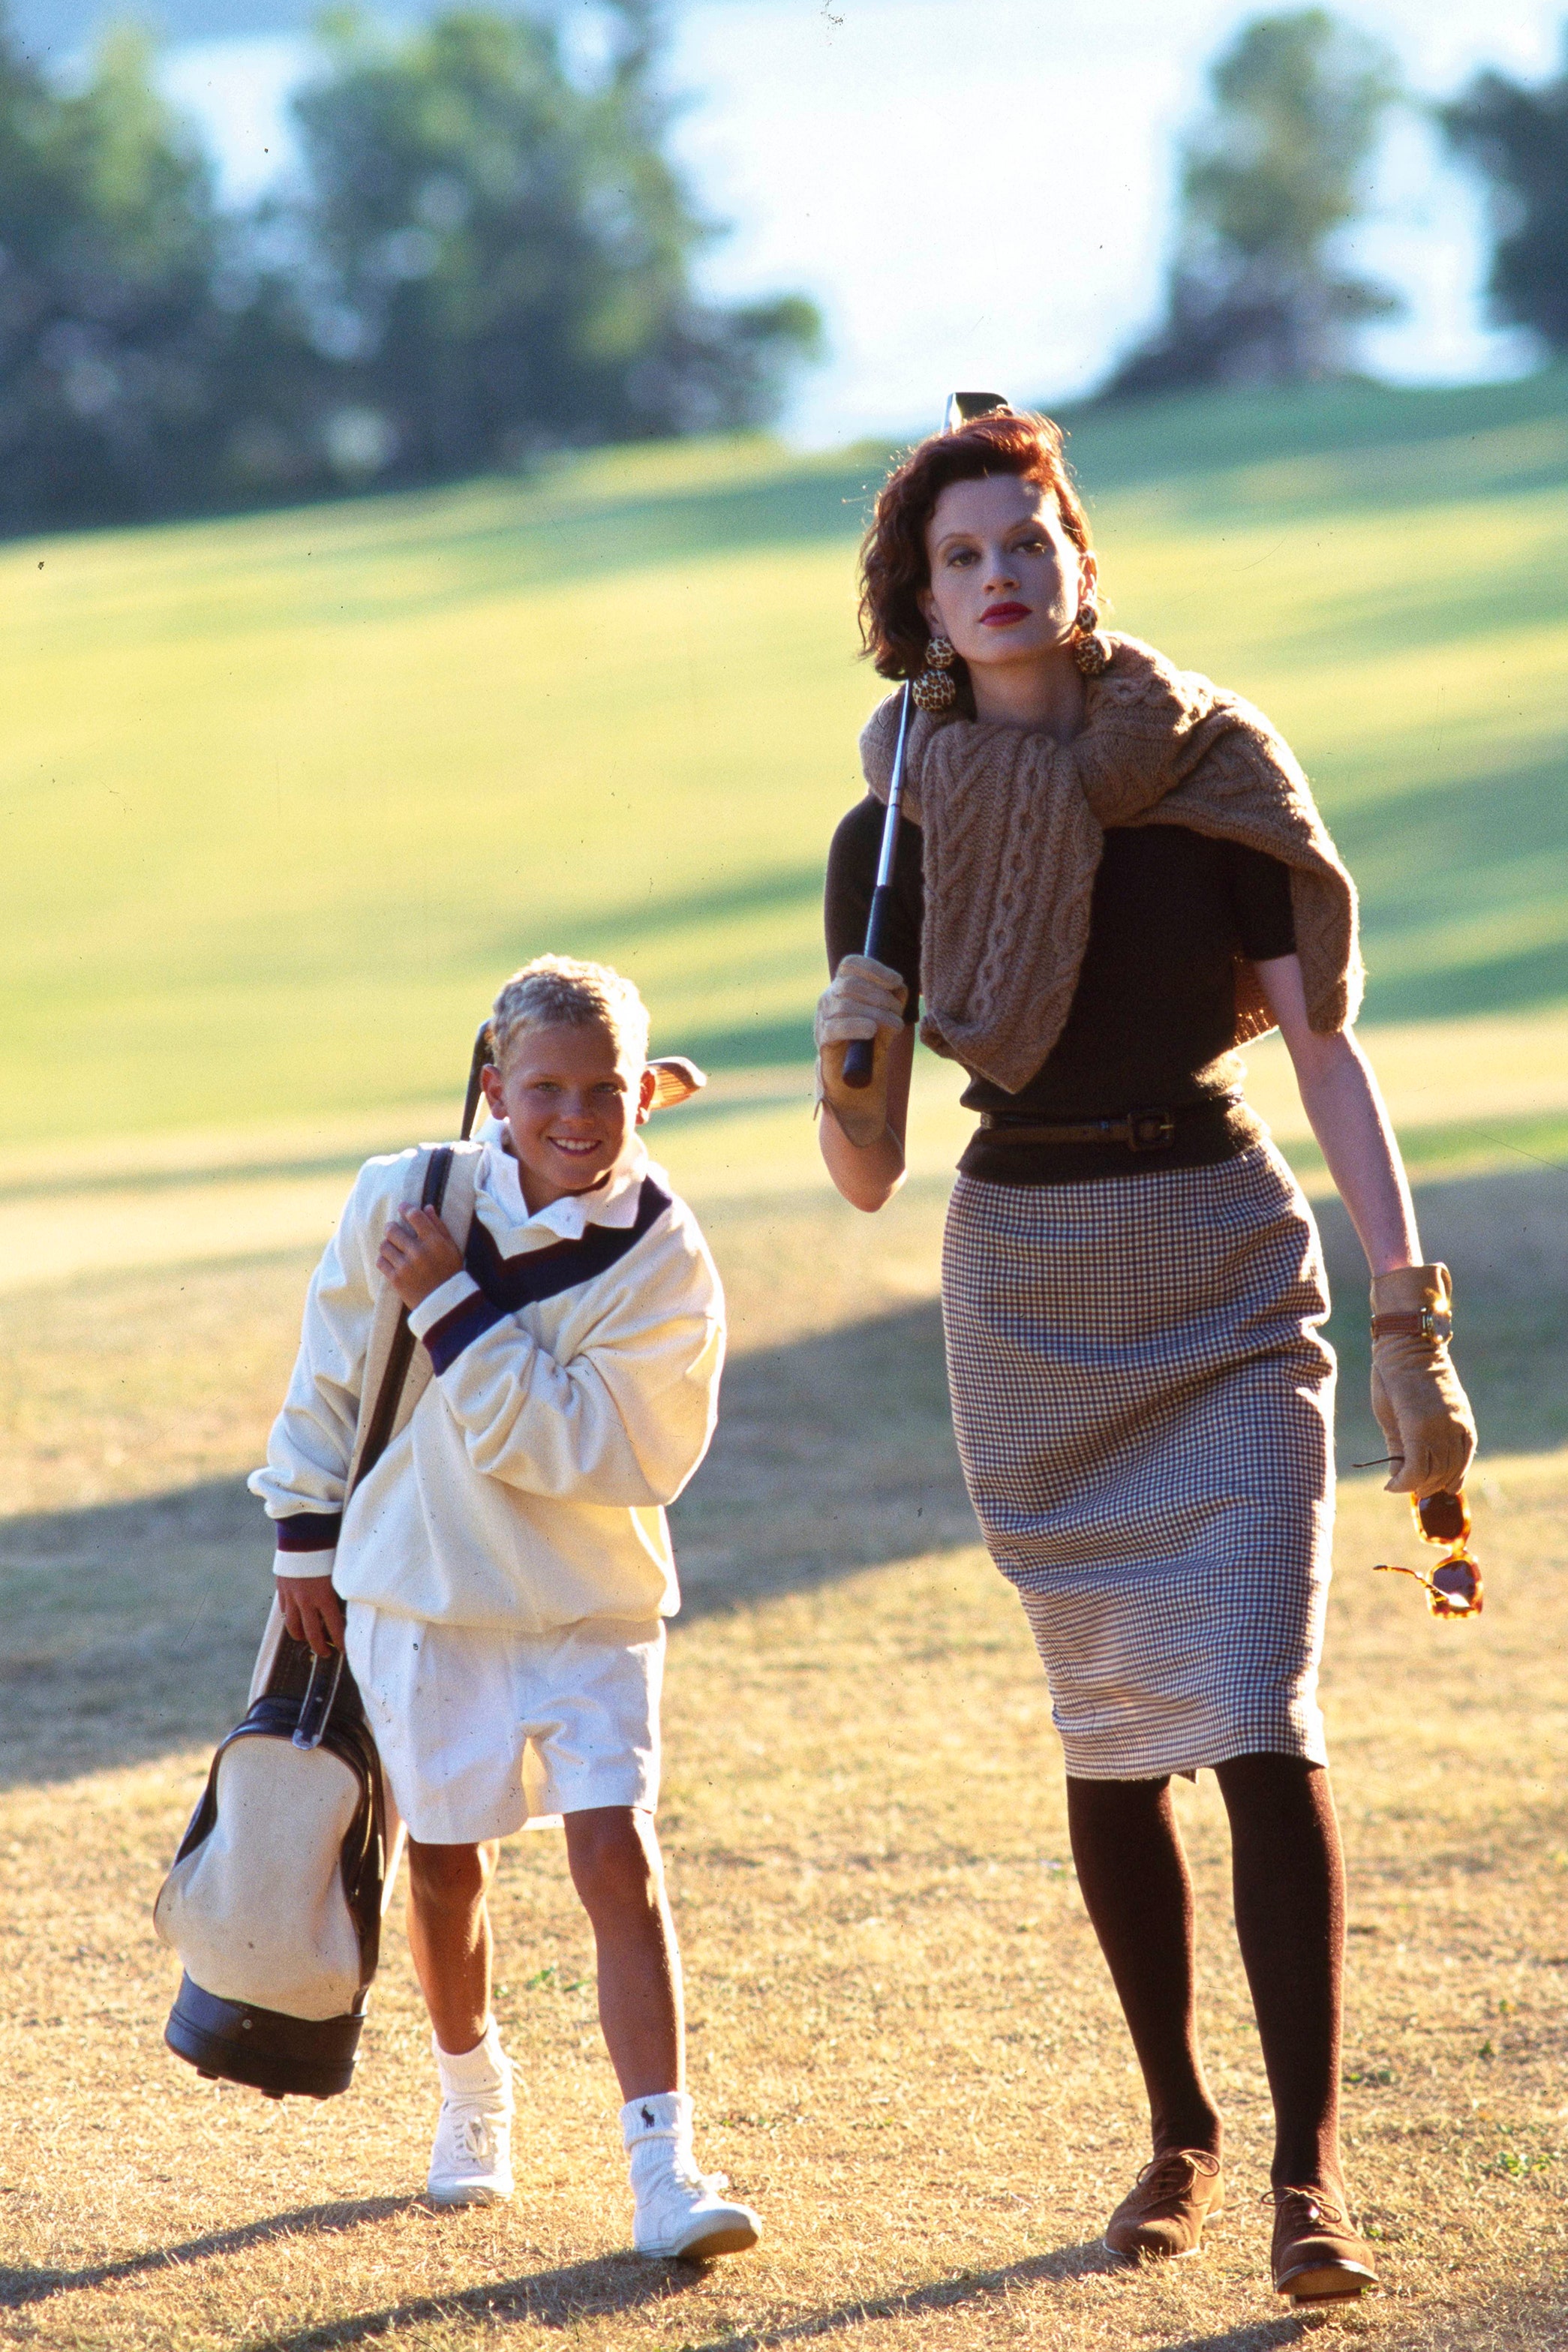 UNSPECIFIED  NOVEMBER 1  Model Kristen McMenamy walking down golf green with young male caddie with a ribbed mock...